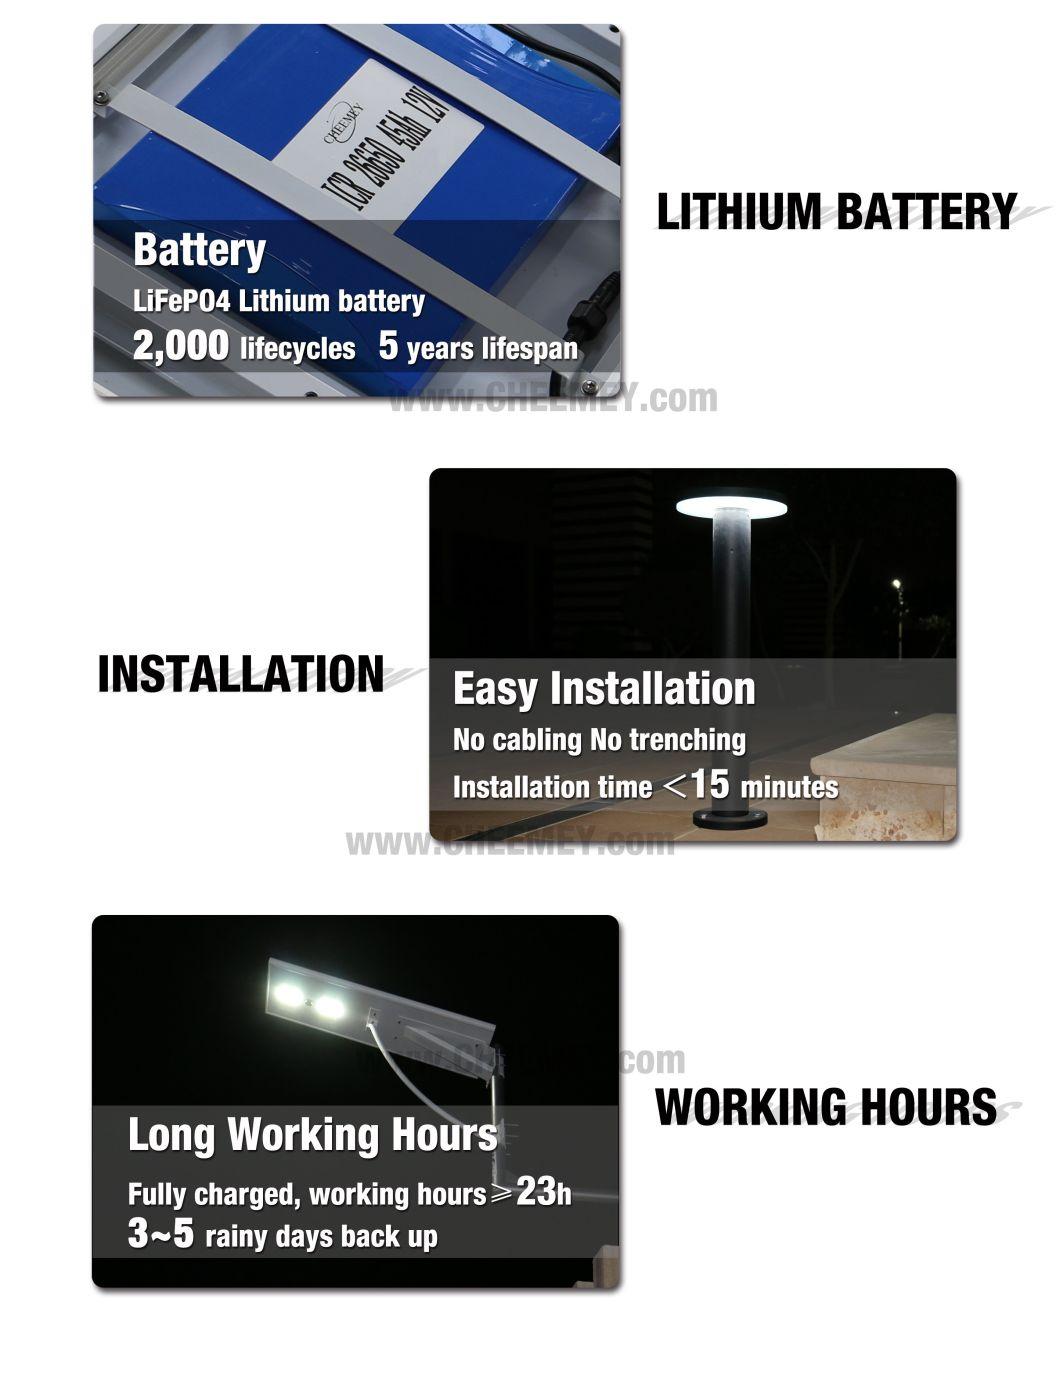 40W All in One LED Solar Street Light for Project